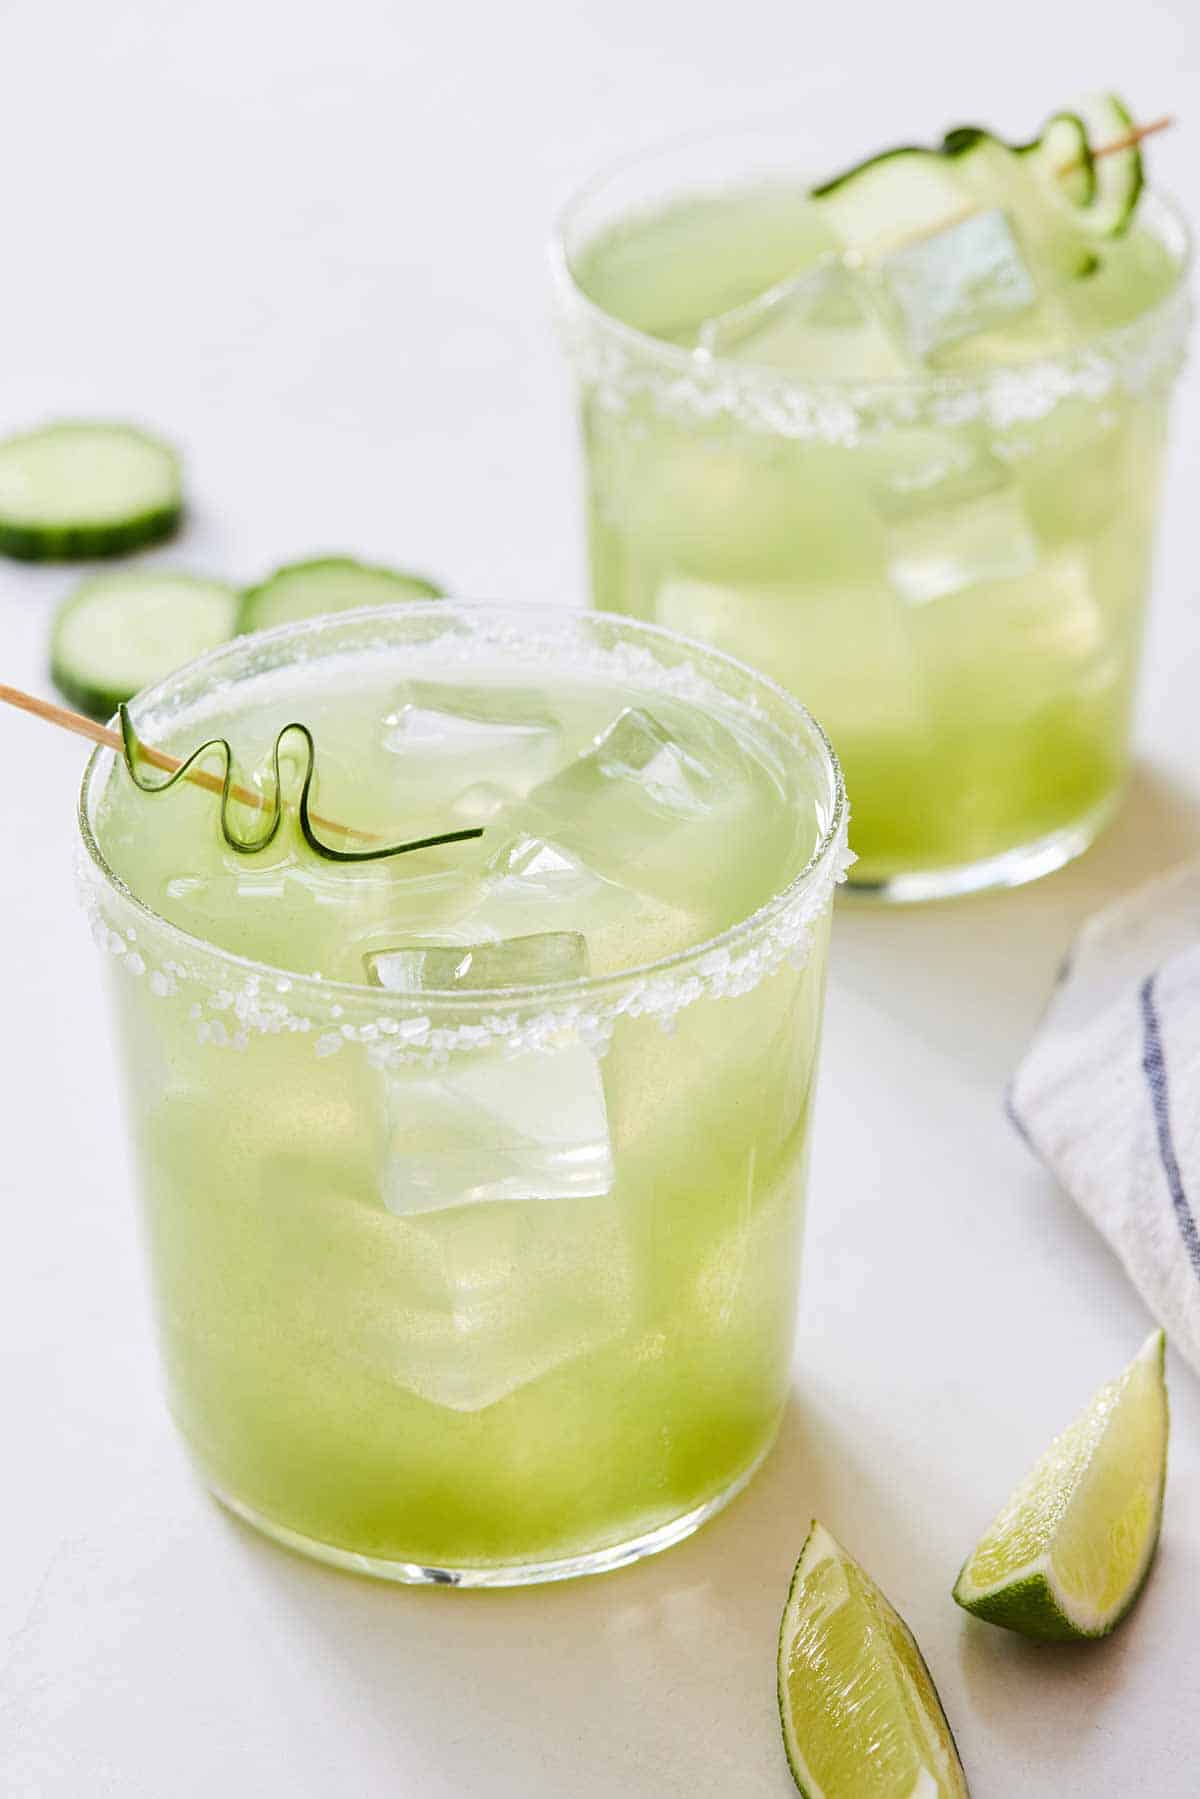 Two glasses of cucumber margarita with salted rims and cucumber garnish.